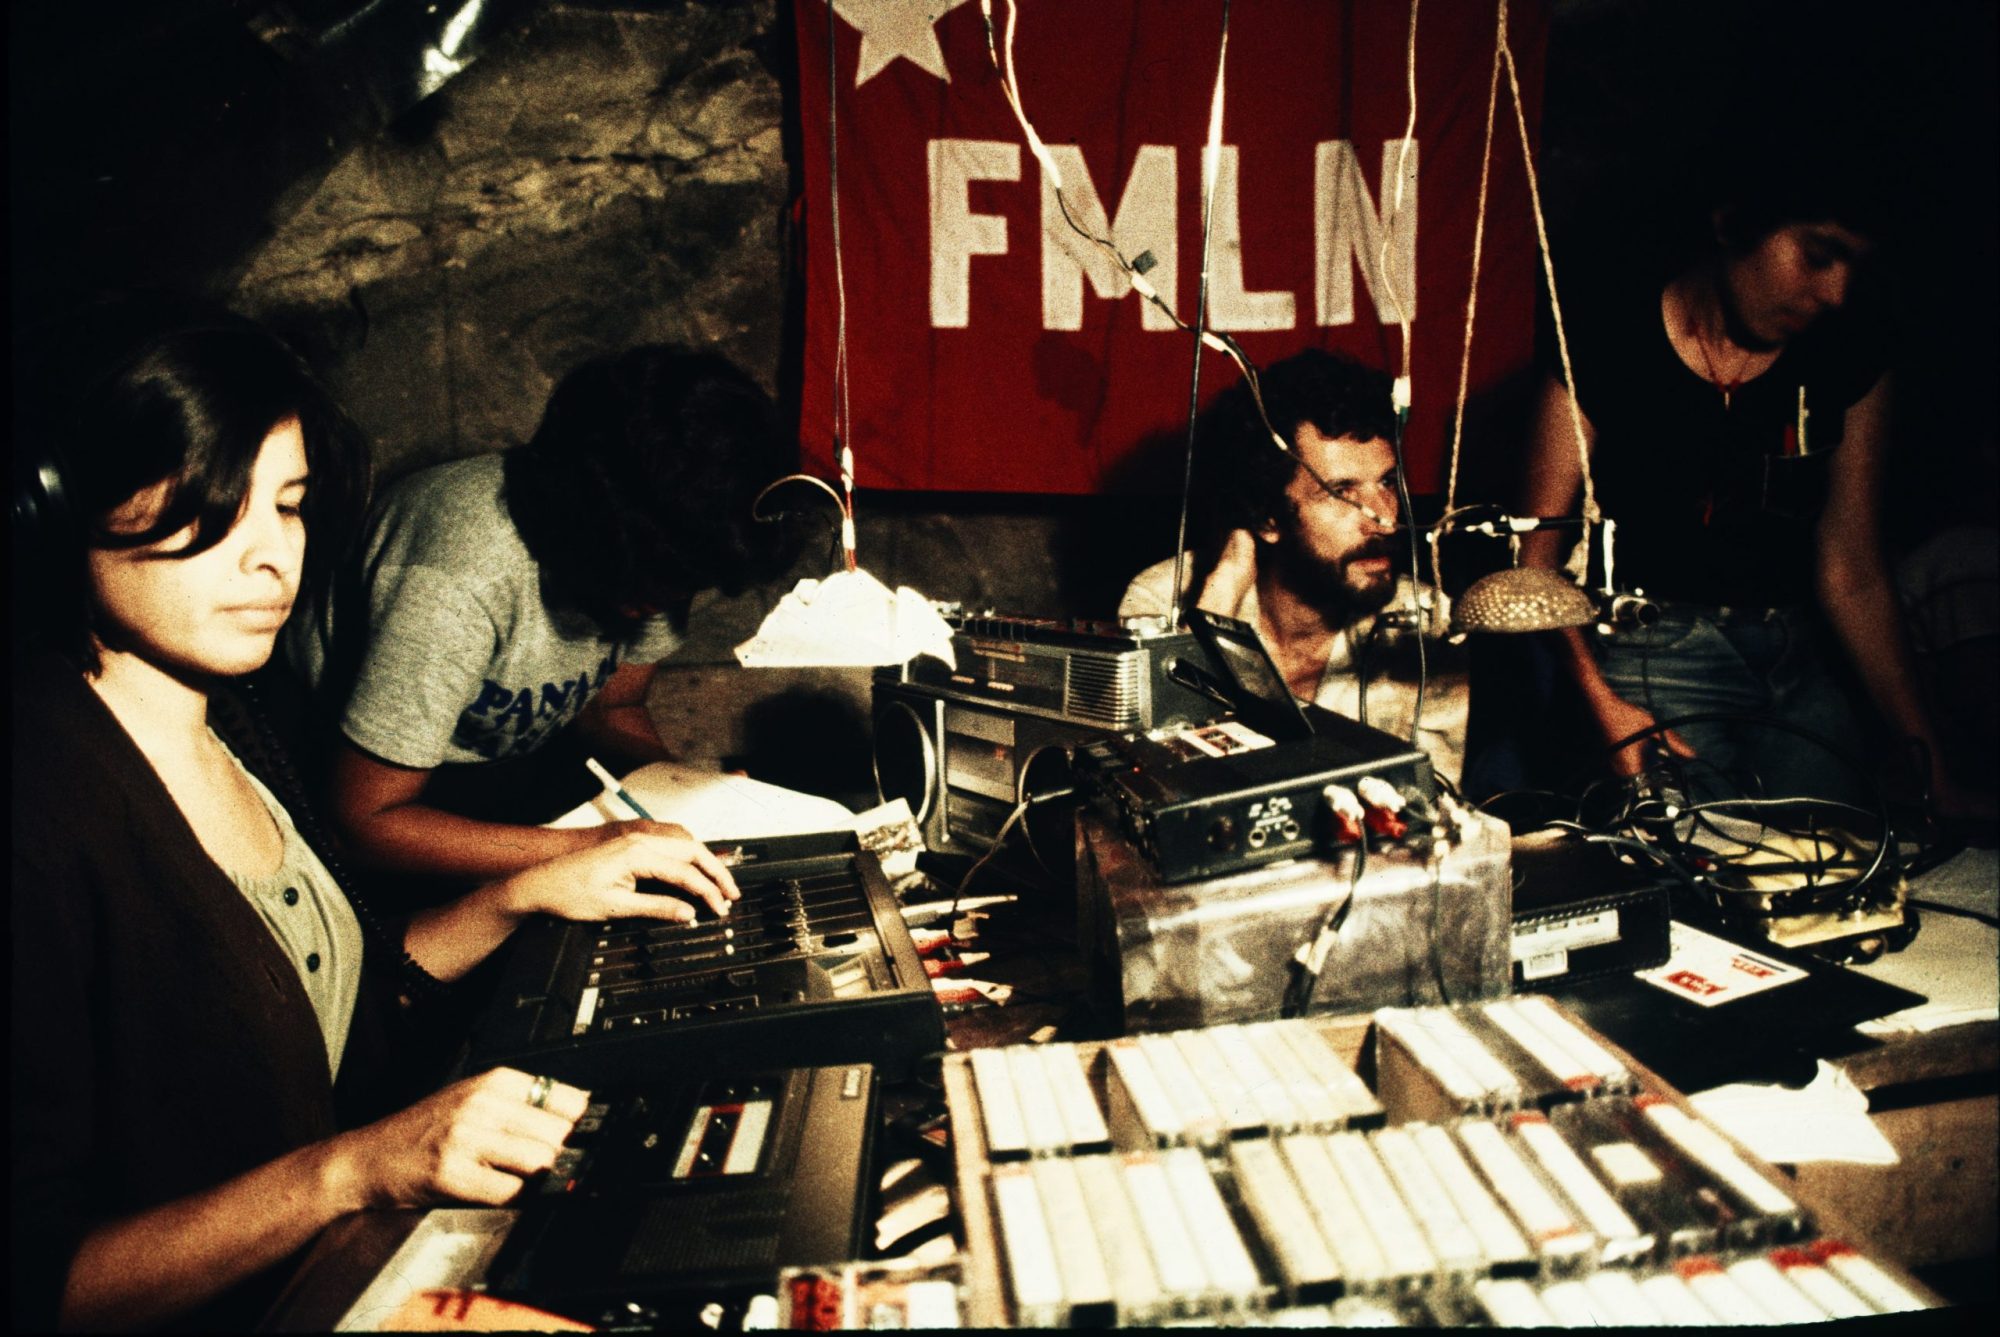 The Radio Venceremos team on air. Photo courtesy of the Museum of Word and Image